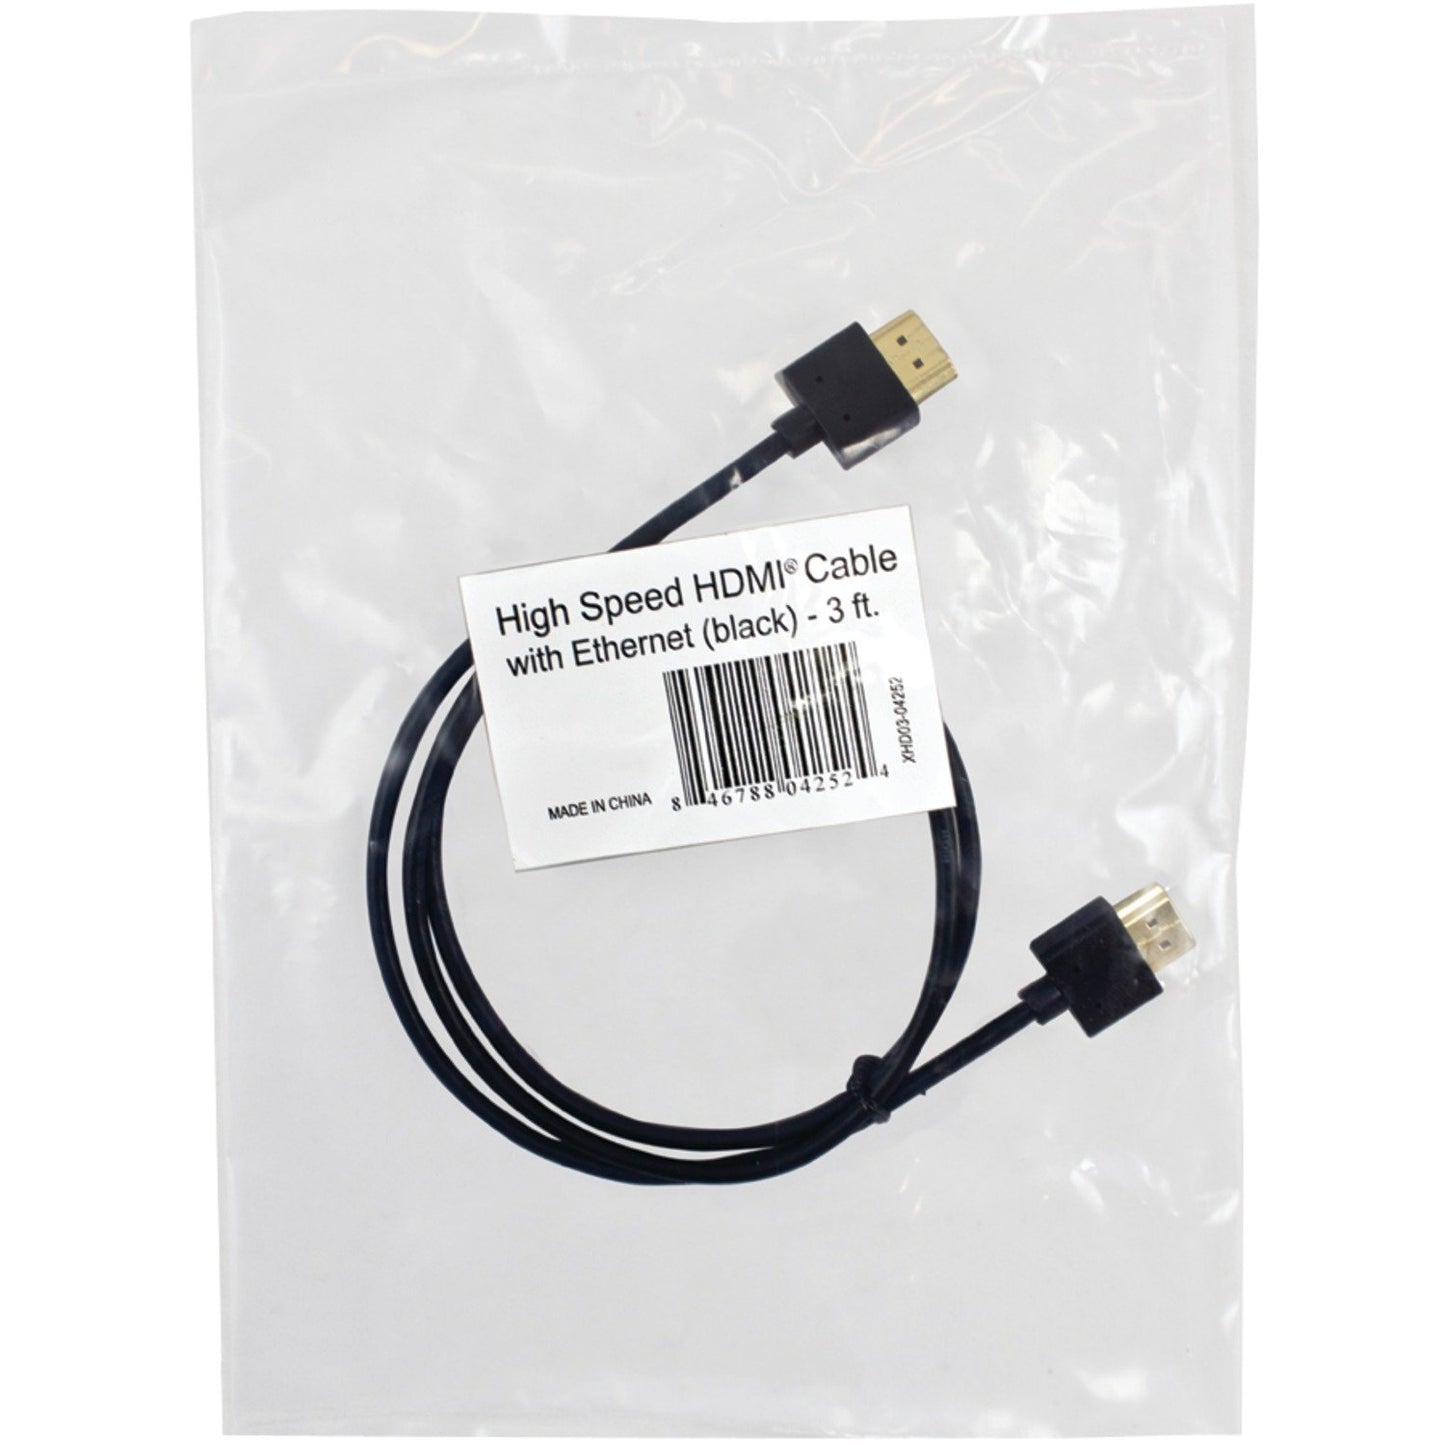 VERICOM XHD01-04252 Gold-Plated High-Speed HDMI® Cable with Ethernet (3ft)